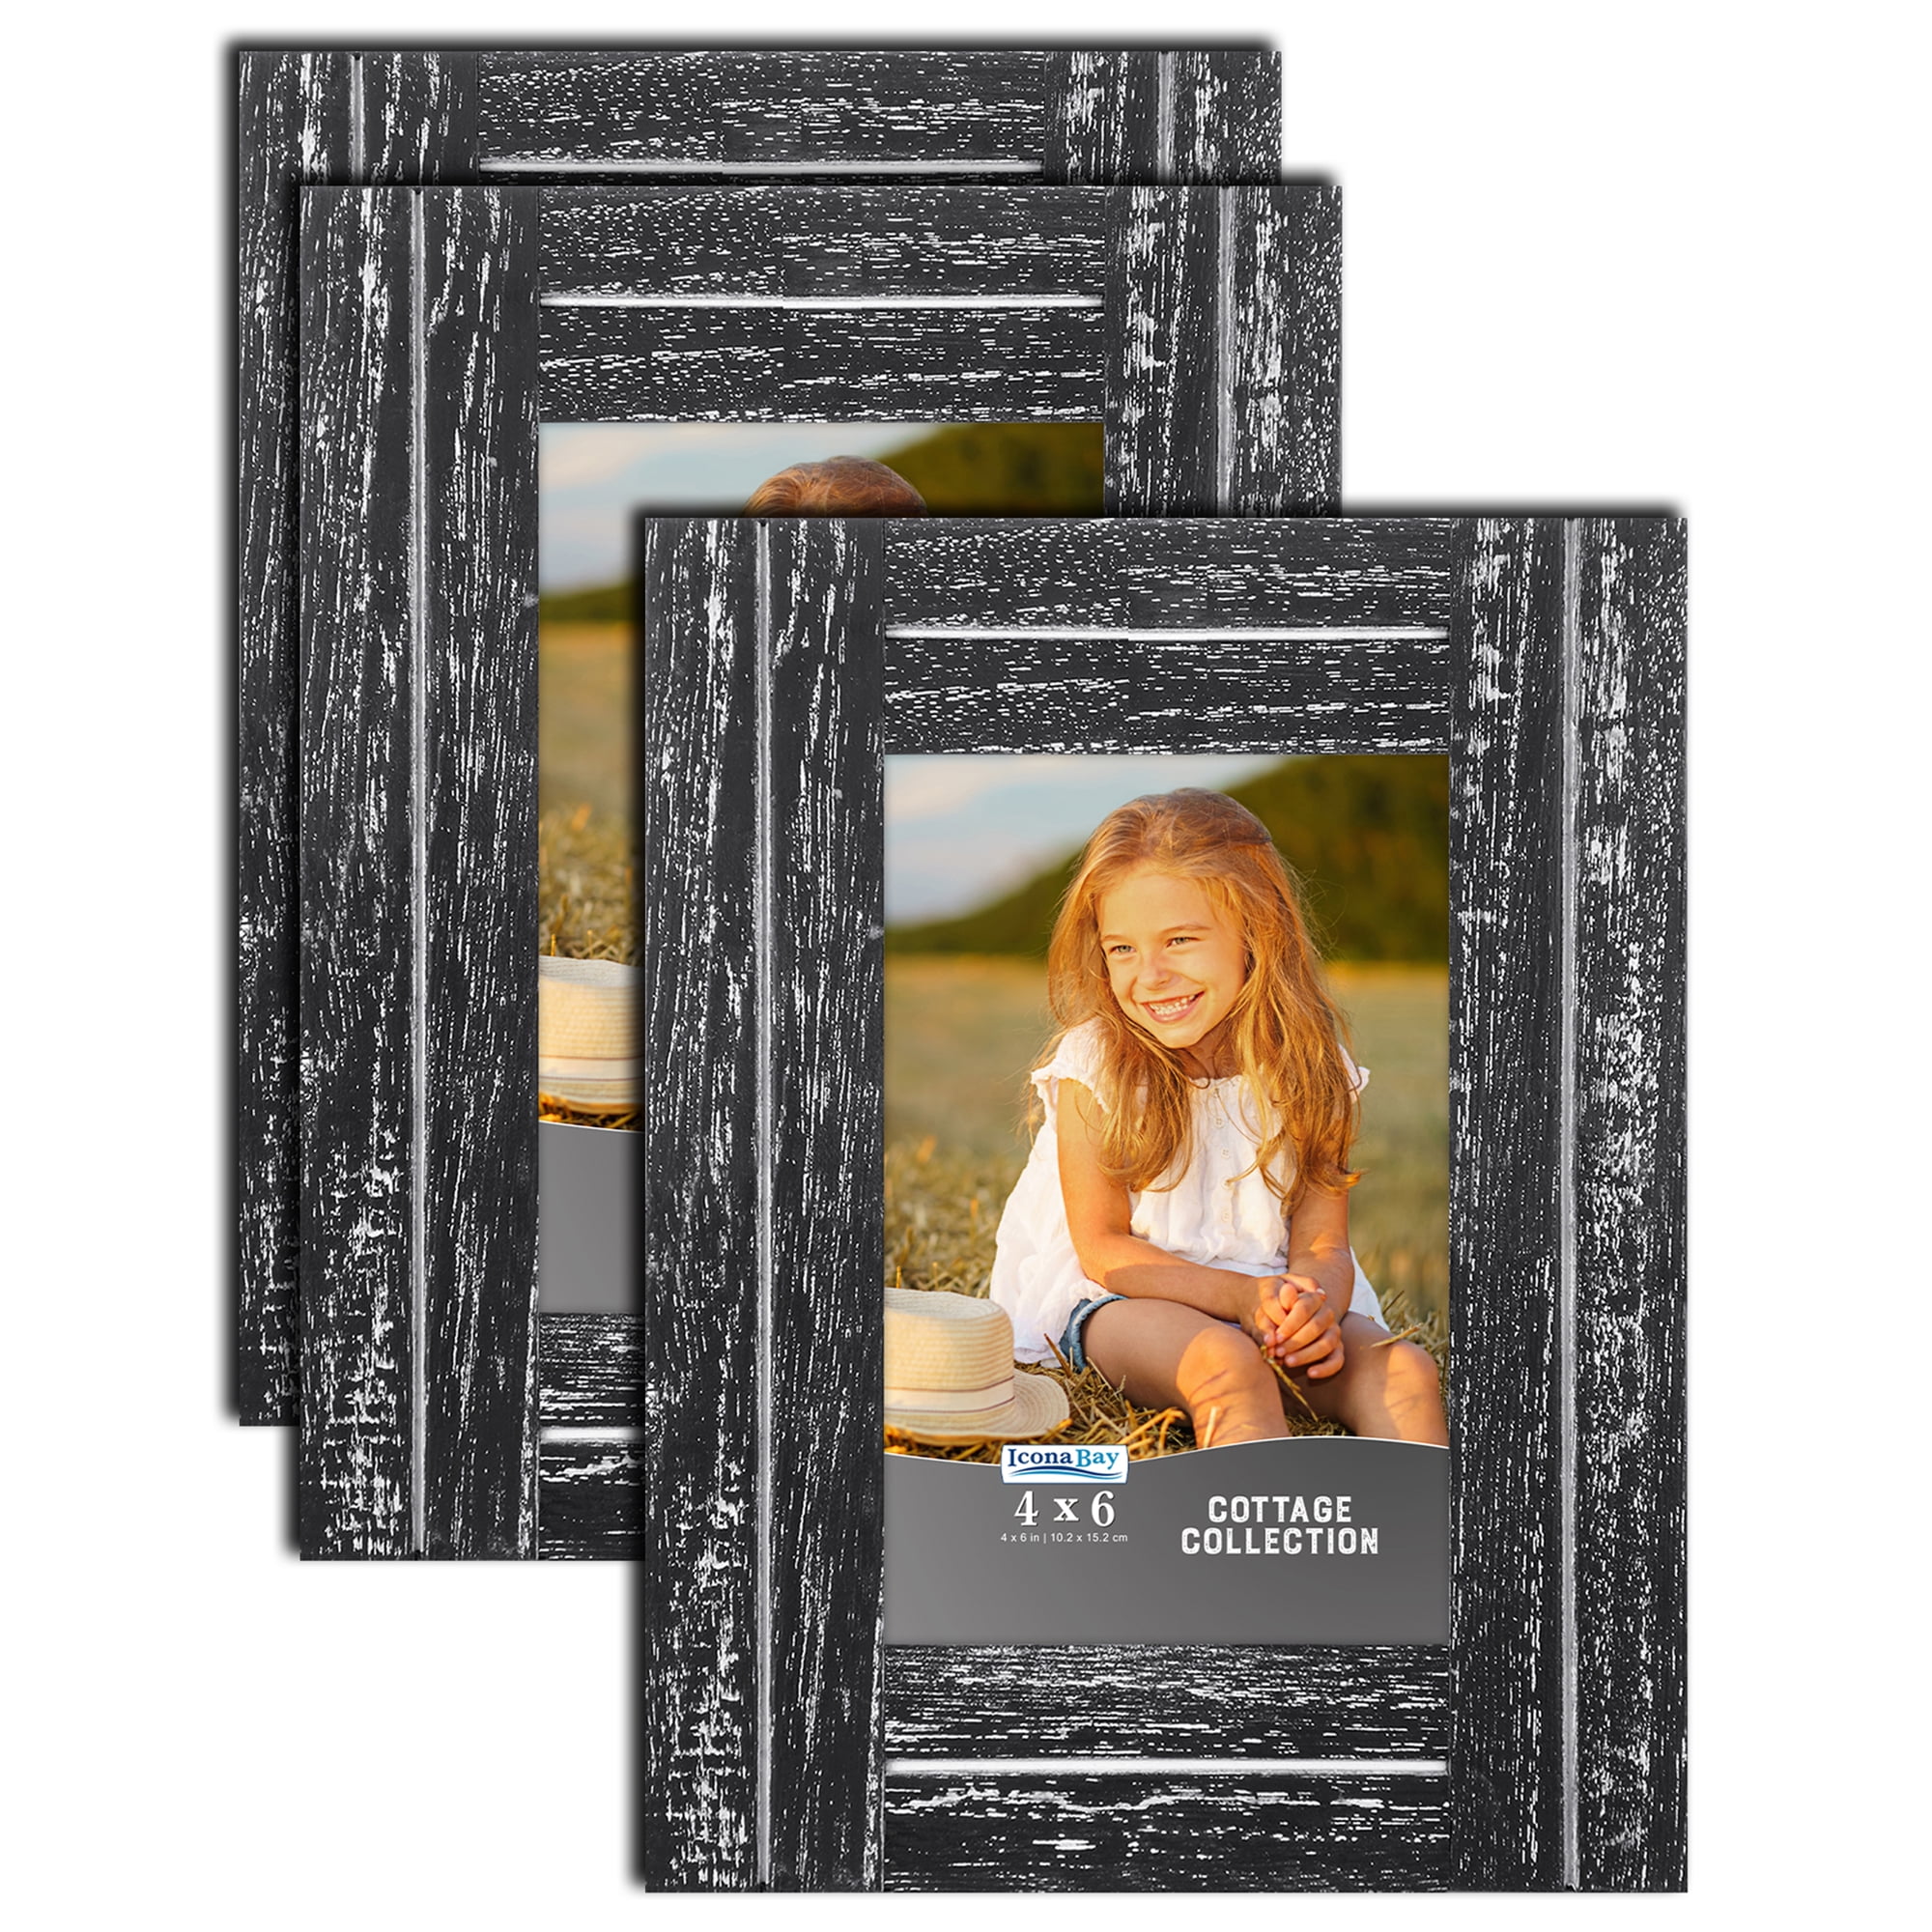 Icona Bay Cottage Picture Frames Distressed Wood Look Farmhouse Style 